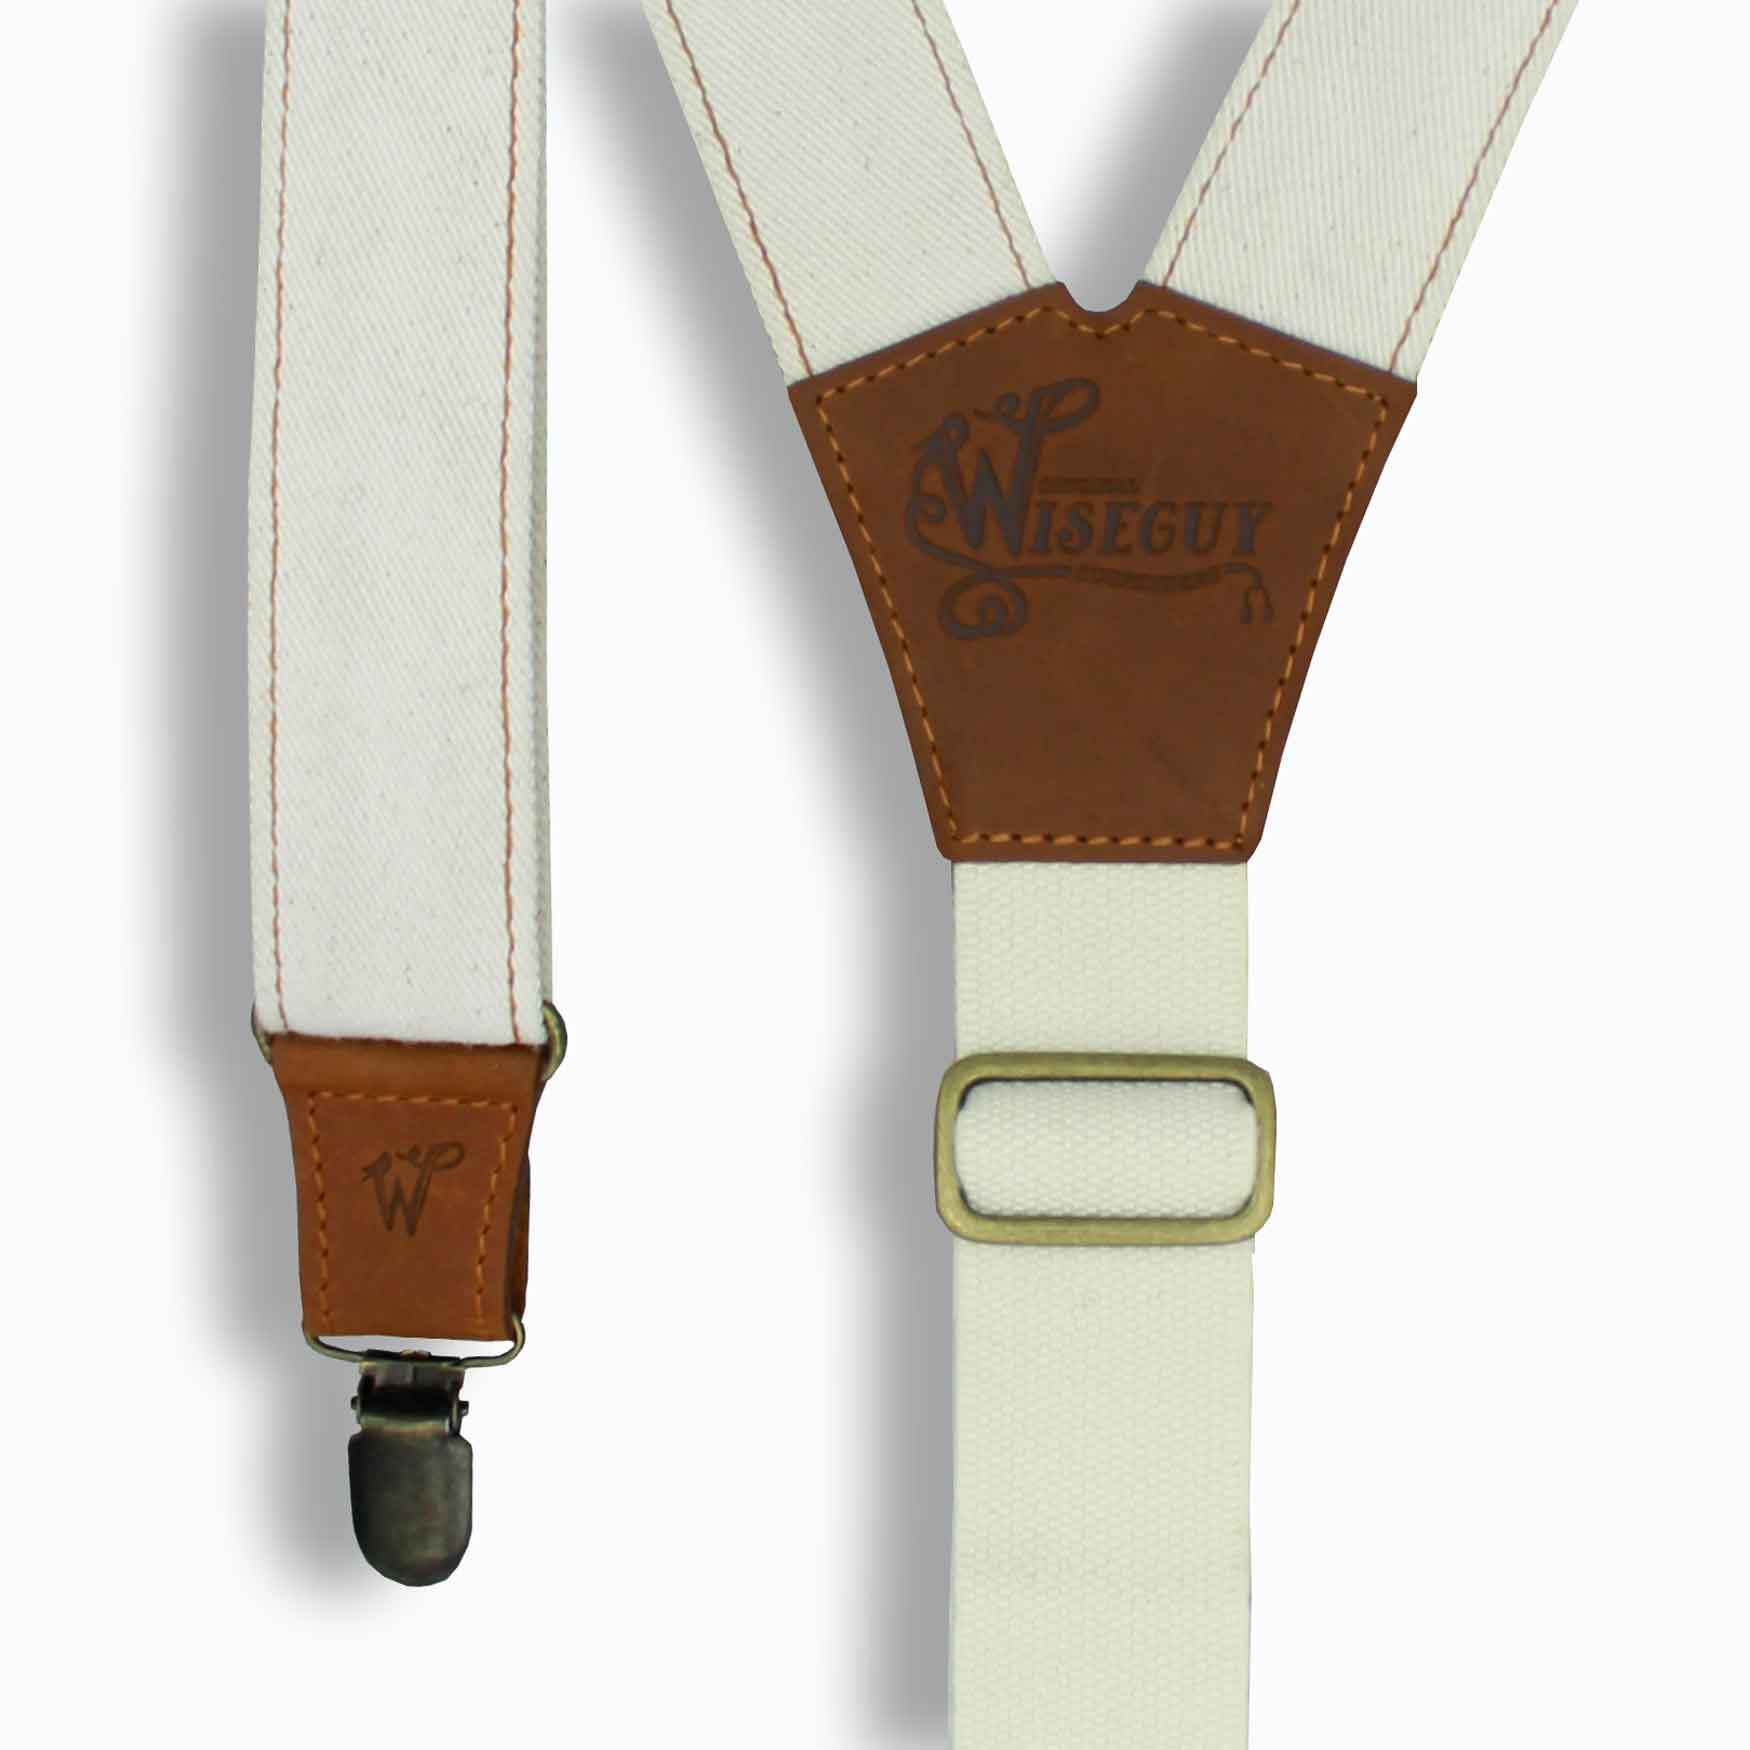 The Duck Ivory Denim Braces with Camel Brown Leather Parts 1.3 inch - Wiseguy Suspenders